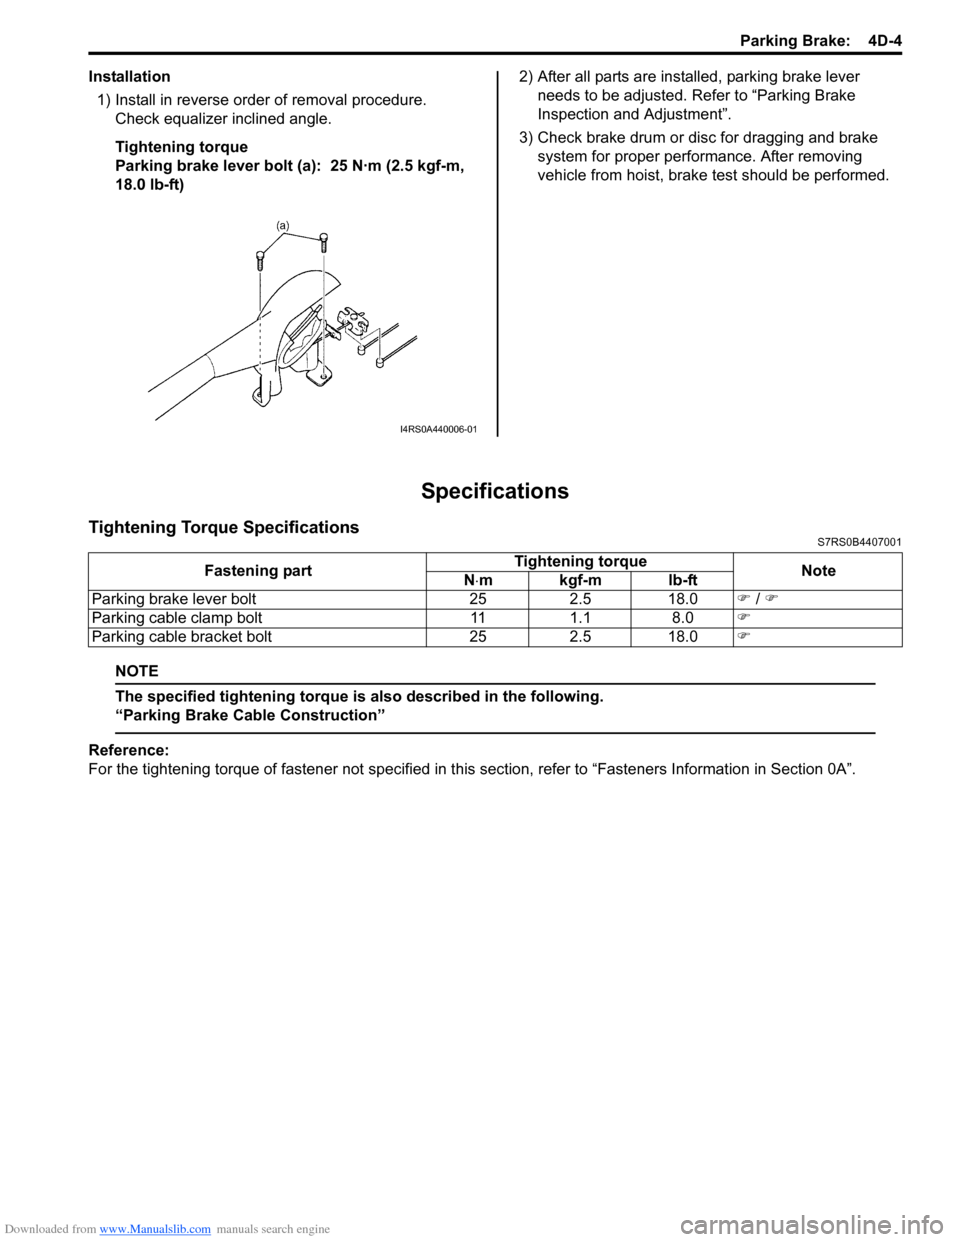 SUZUKI SWIFT 2007 2.G Service Workshop Manual Downloaded from www.Manualslib.com manuals search engine Parking Brake:  4D-4
Installation1) Install in reverse order of removal procedure. Check equalizer inclined angle.
Tightening torque
Parking br